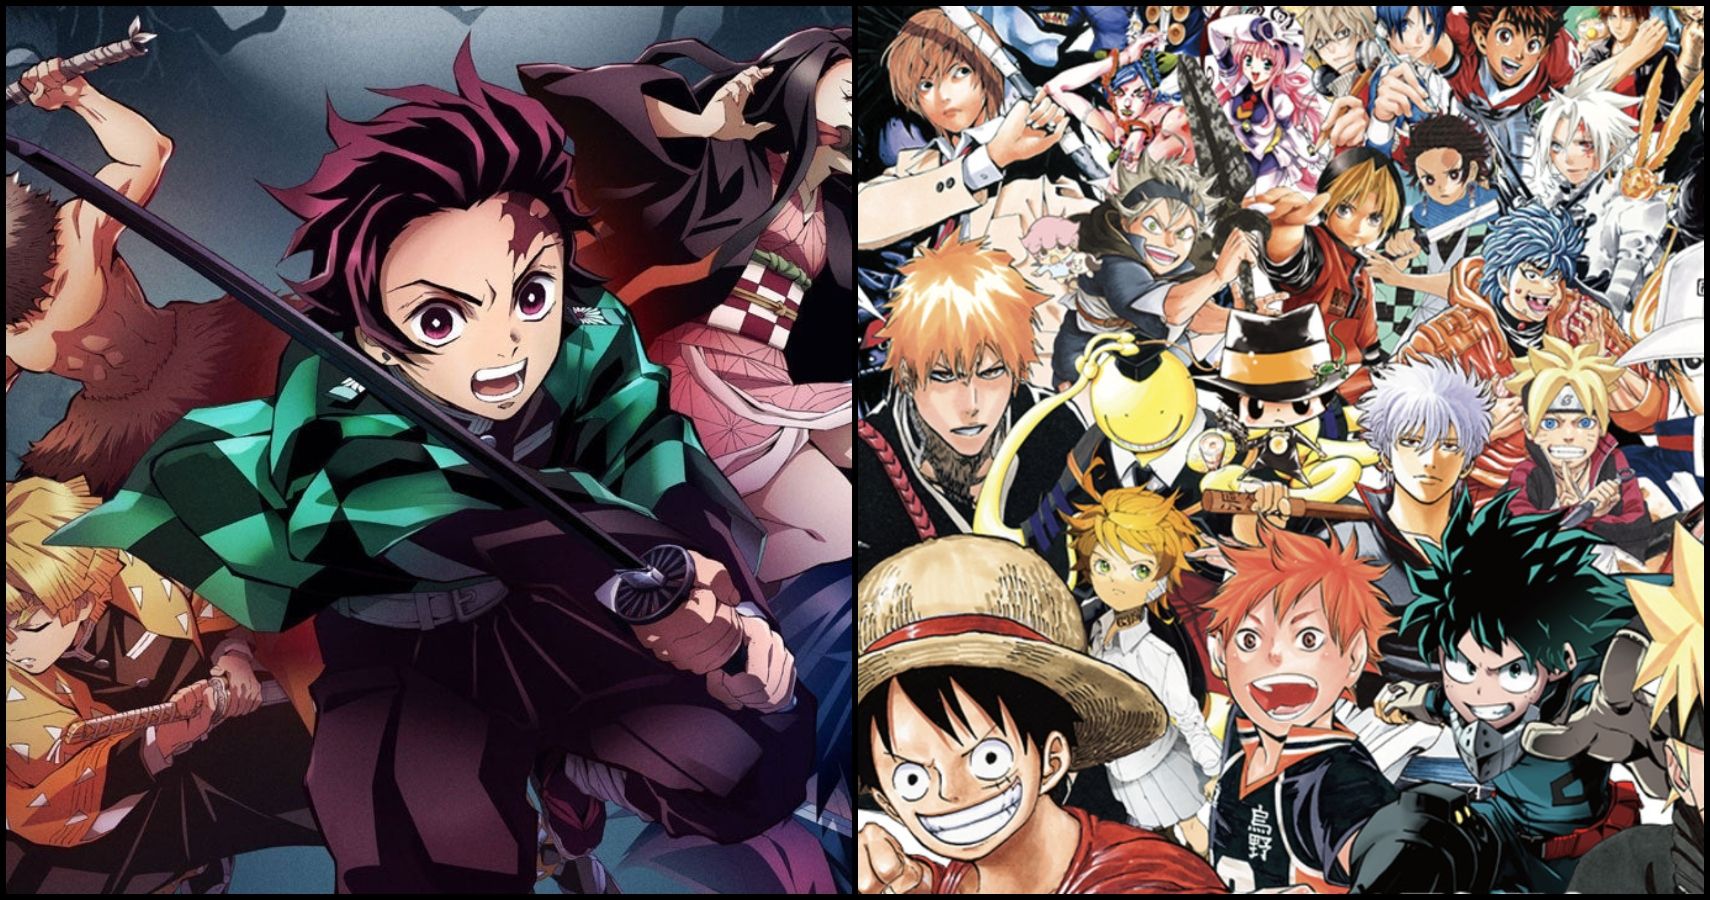 Demon Slayer: 5 Times It Proved To Be The Best Shonen Manga/Anime (5 Times  It Fell Short)